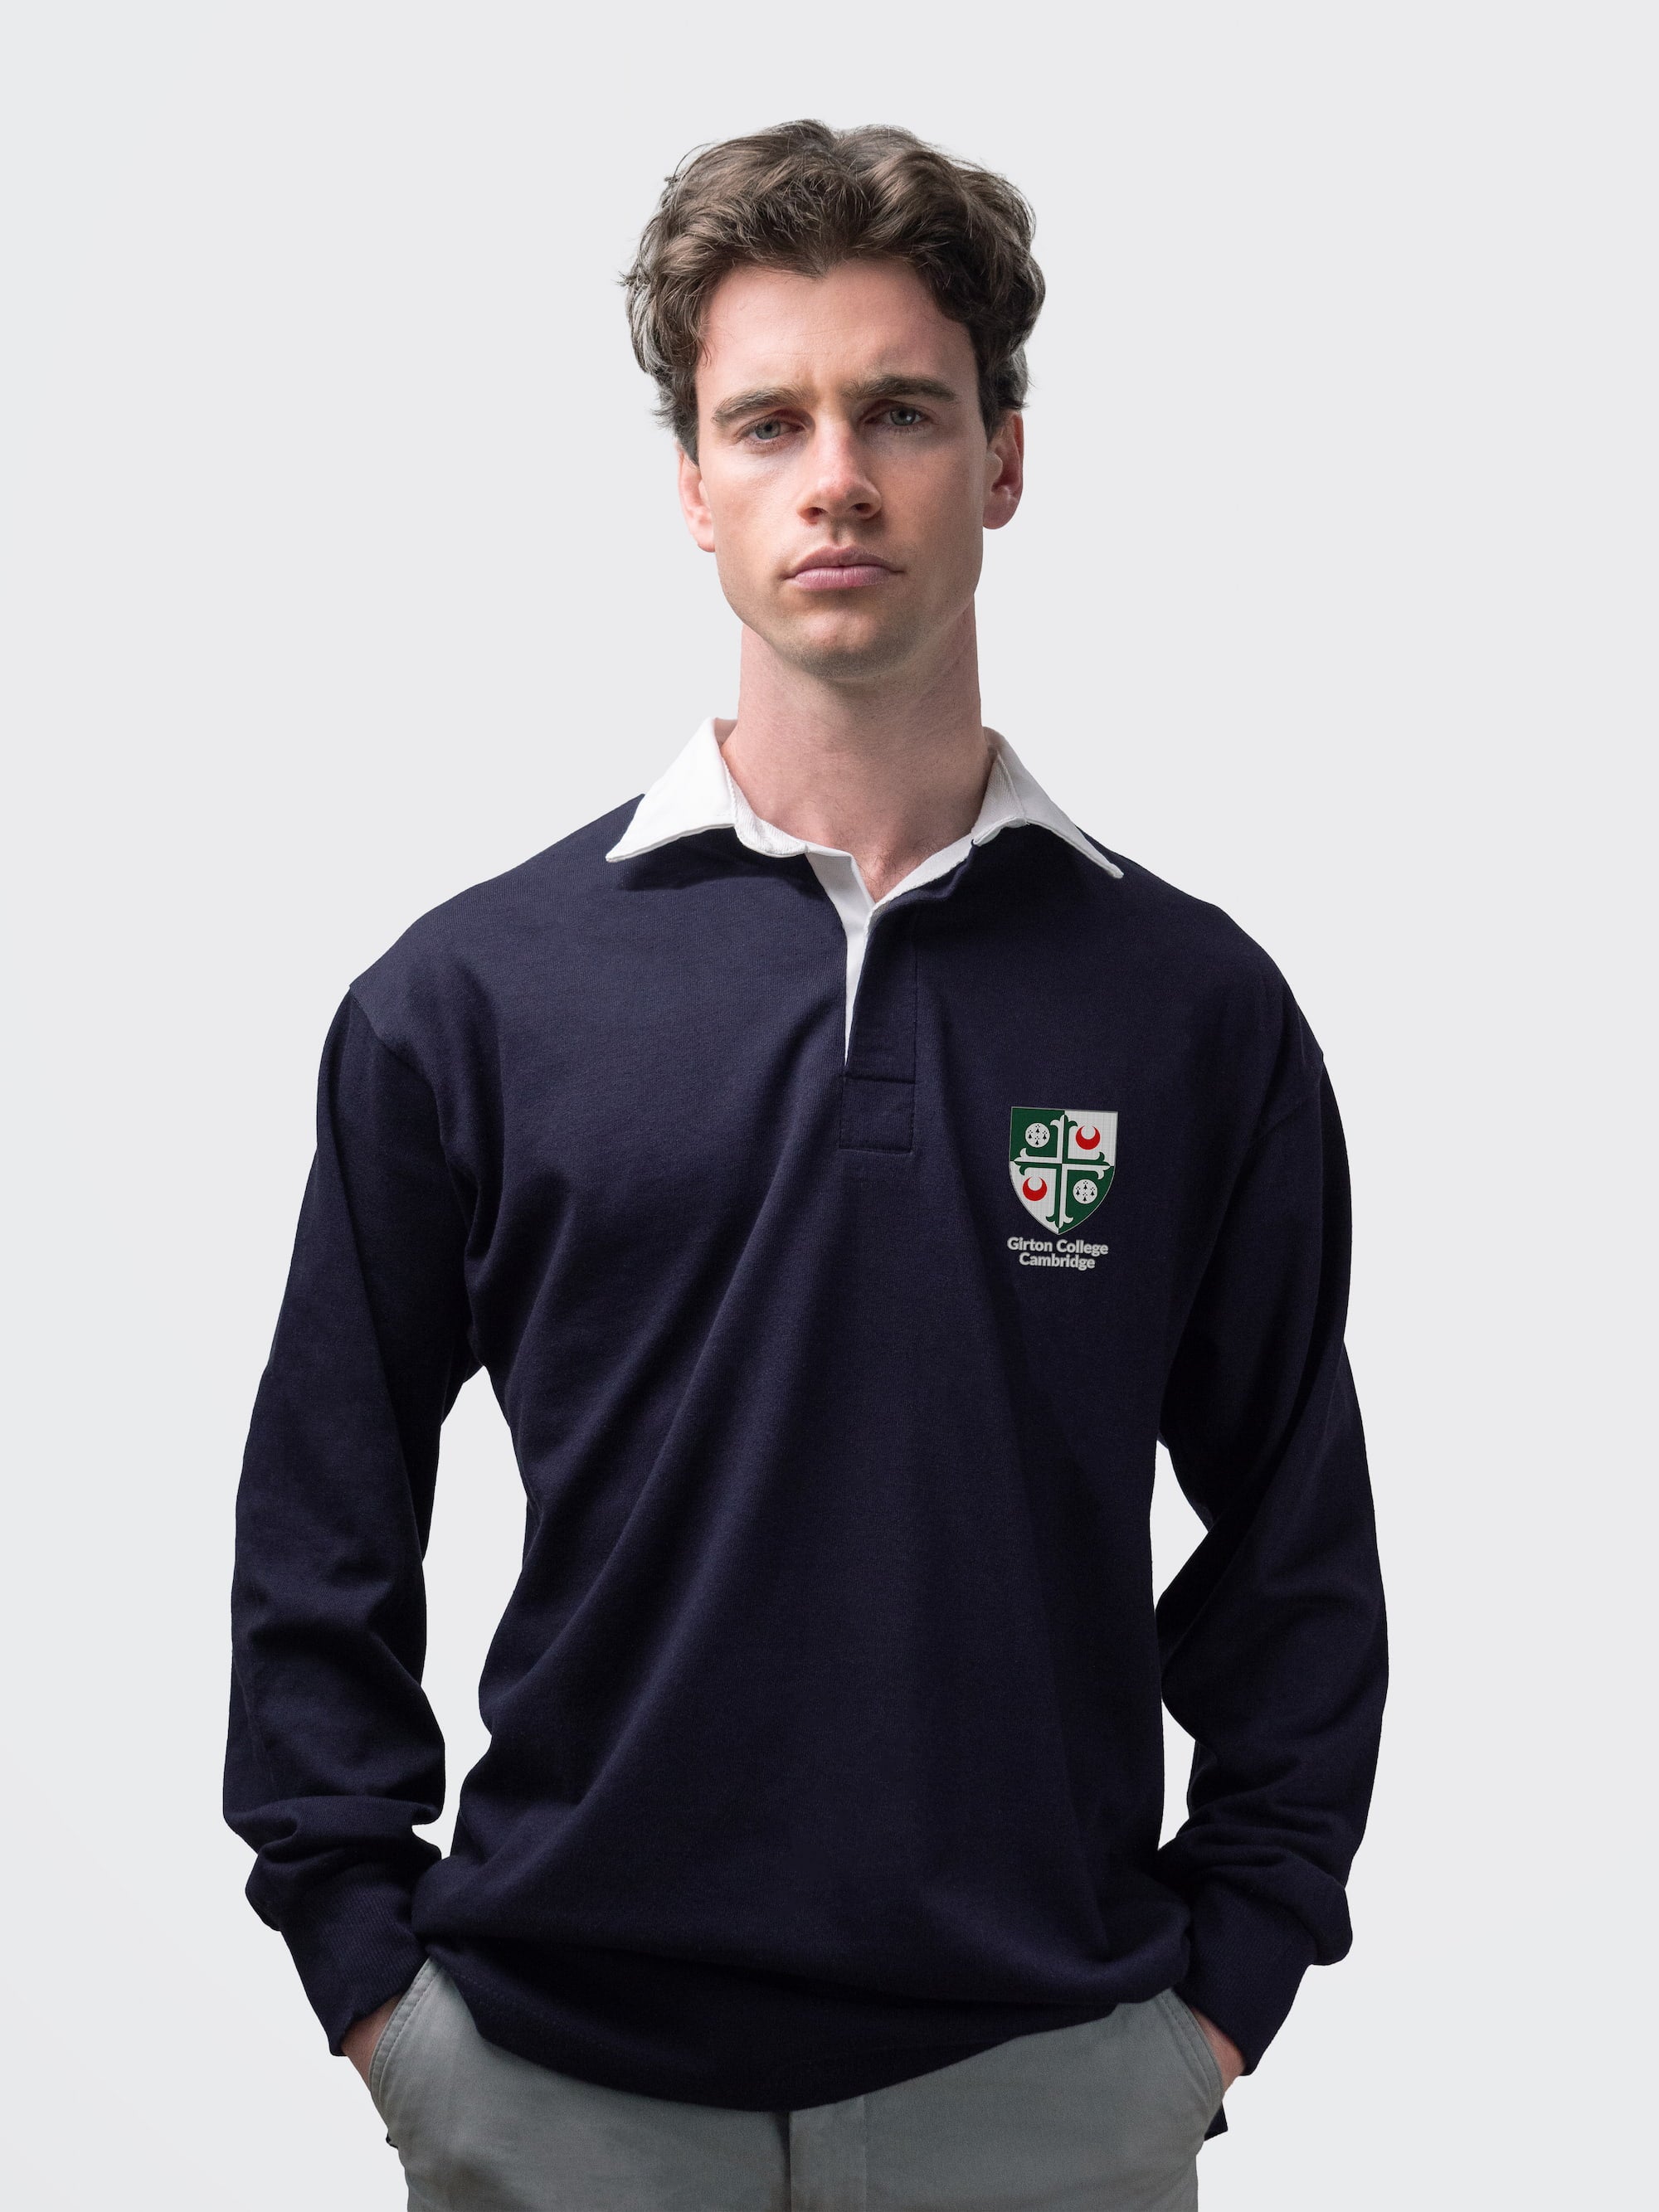 Girton student wearing an embroidered mens rugby shirt in navy